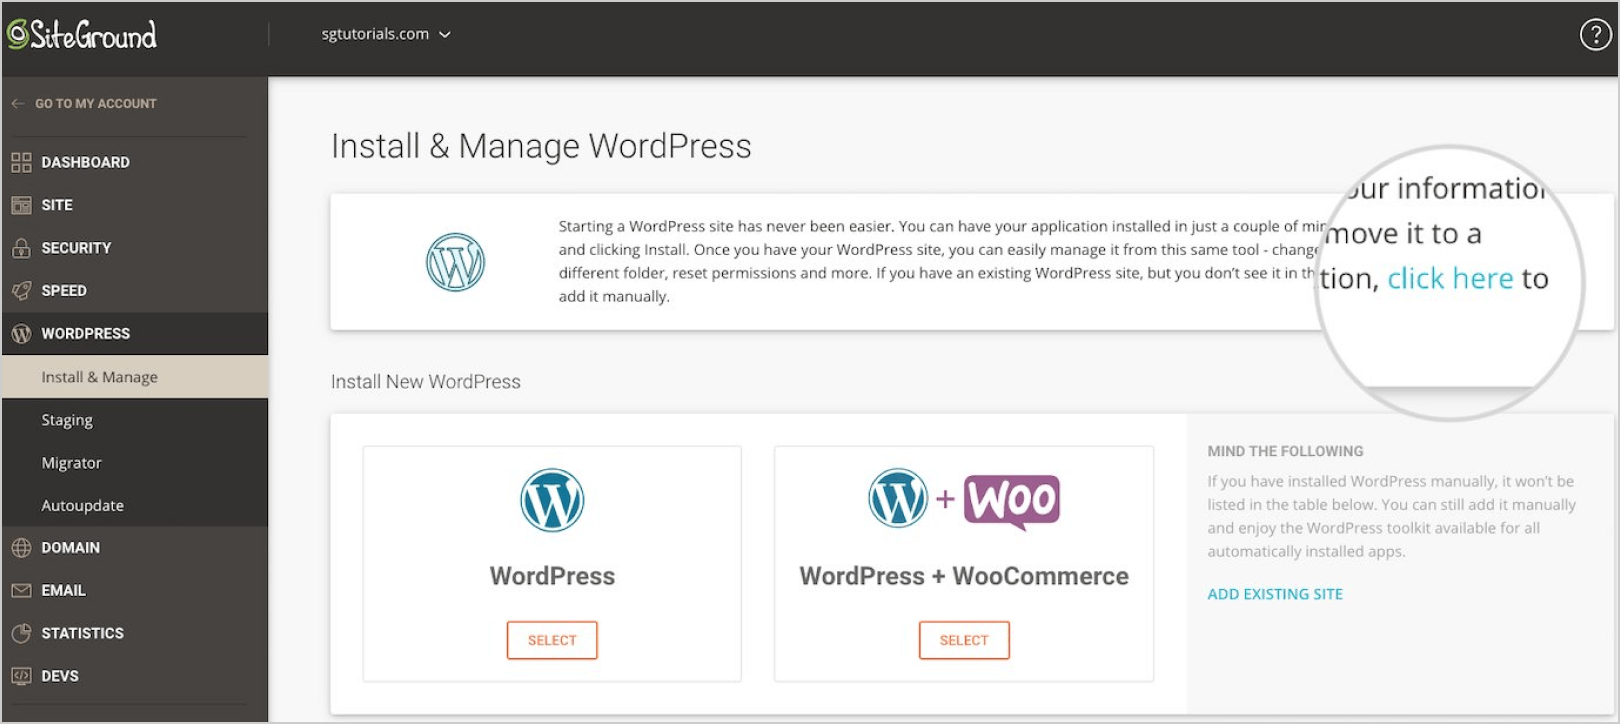 Head to WordPress _ Install and Manage from your SiteGround dashboard